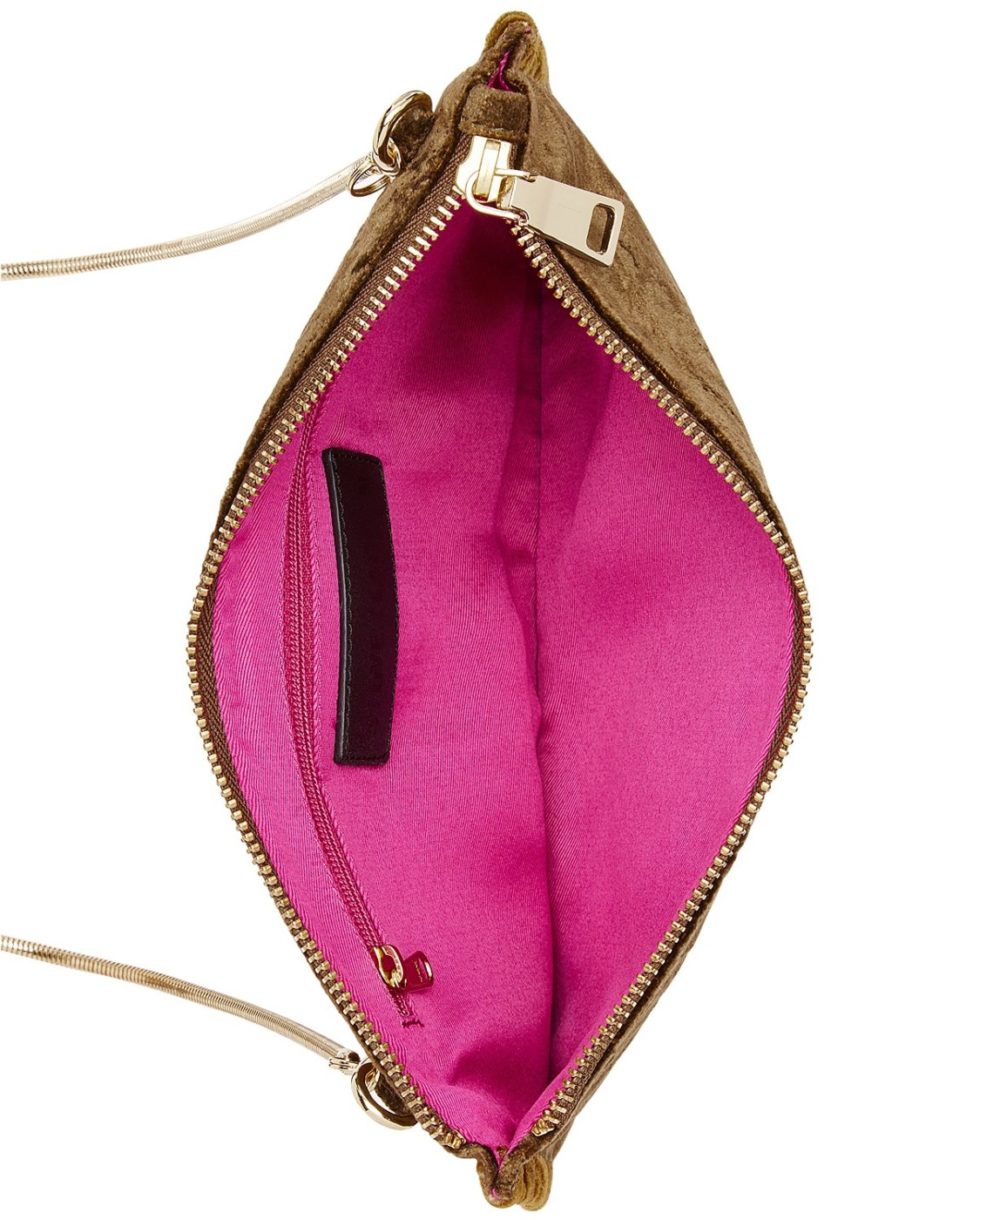 woocommerce-673321-2209615.cloudwaysapps.com-steve-madden-orchid-convertible-small-crossbody-pouch-bag